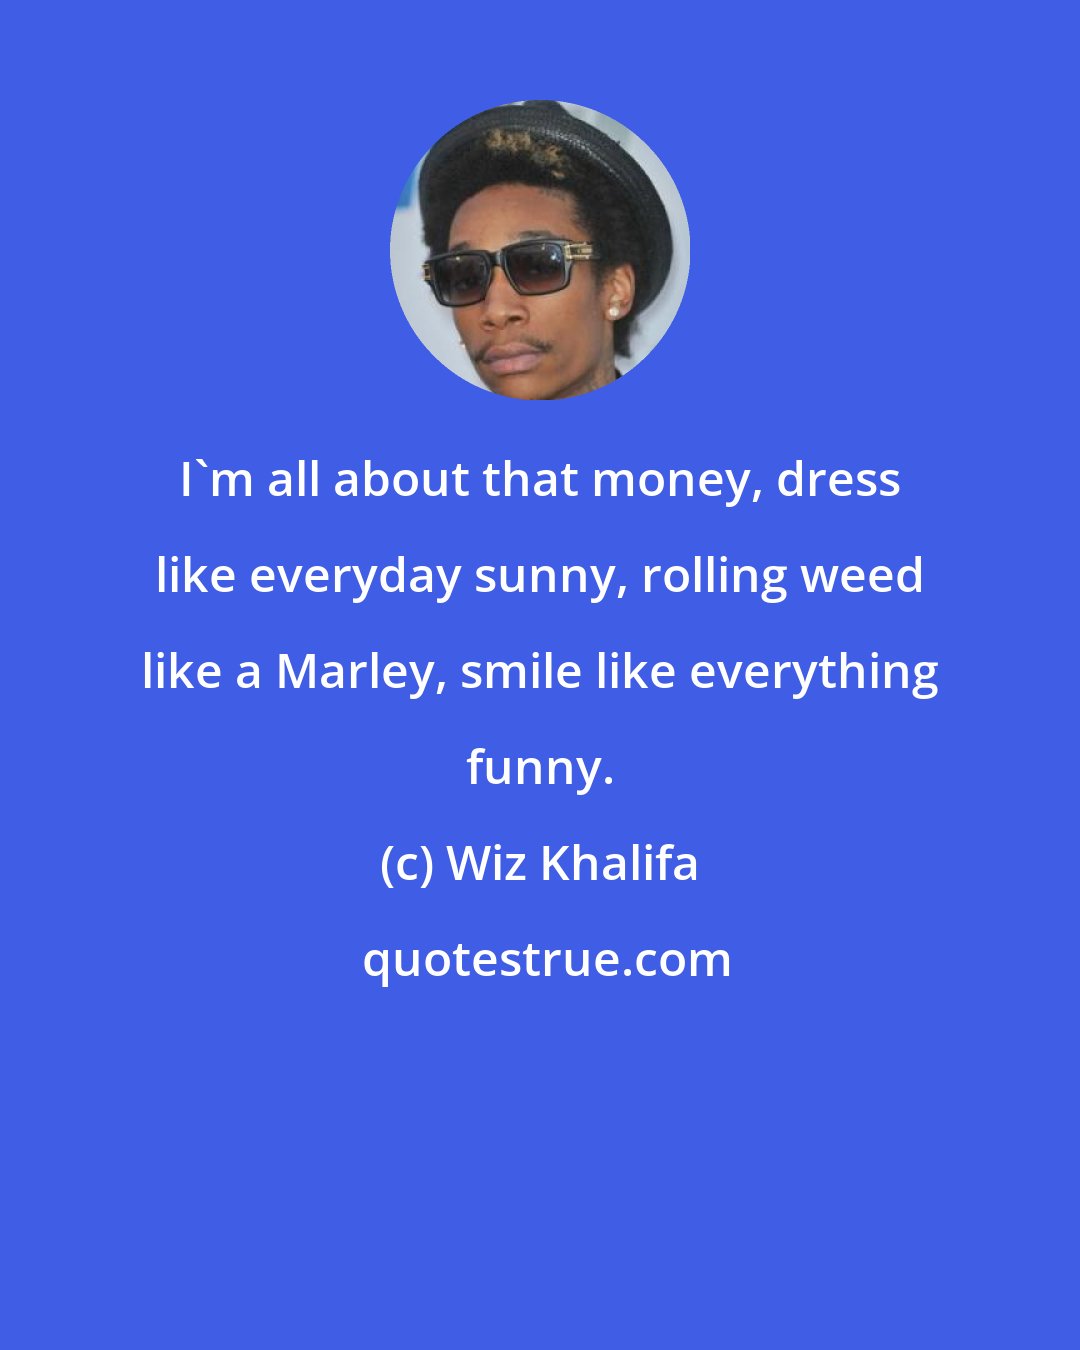 Wiz Khalifa: I'm all about that money, dress like everyday sunny, rolling weed like a Marley, smile like everything funny.